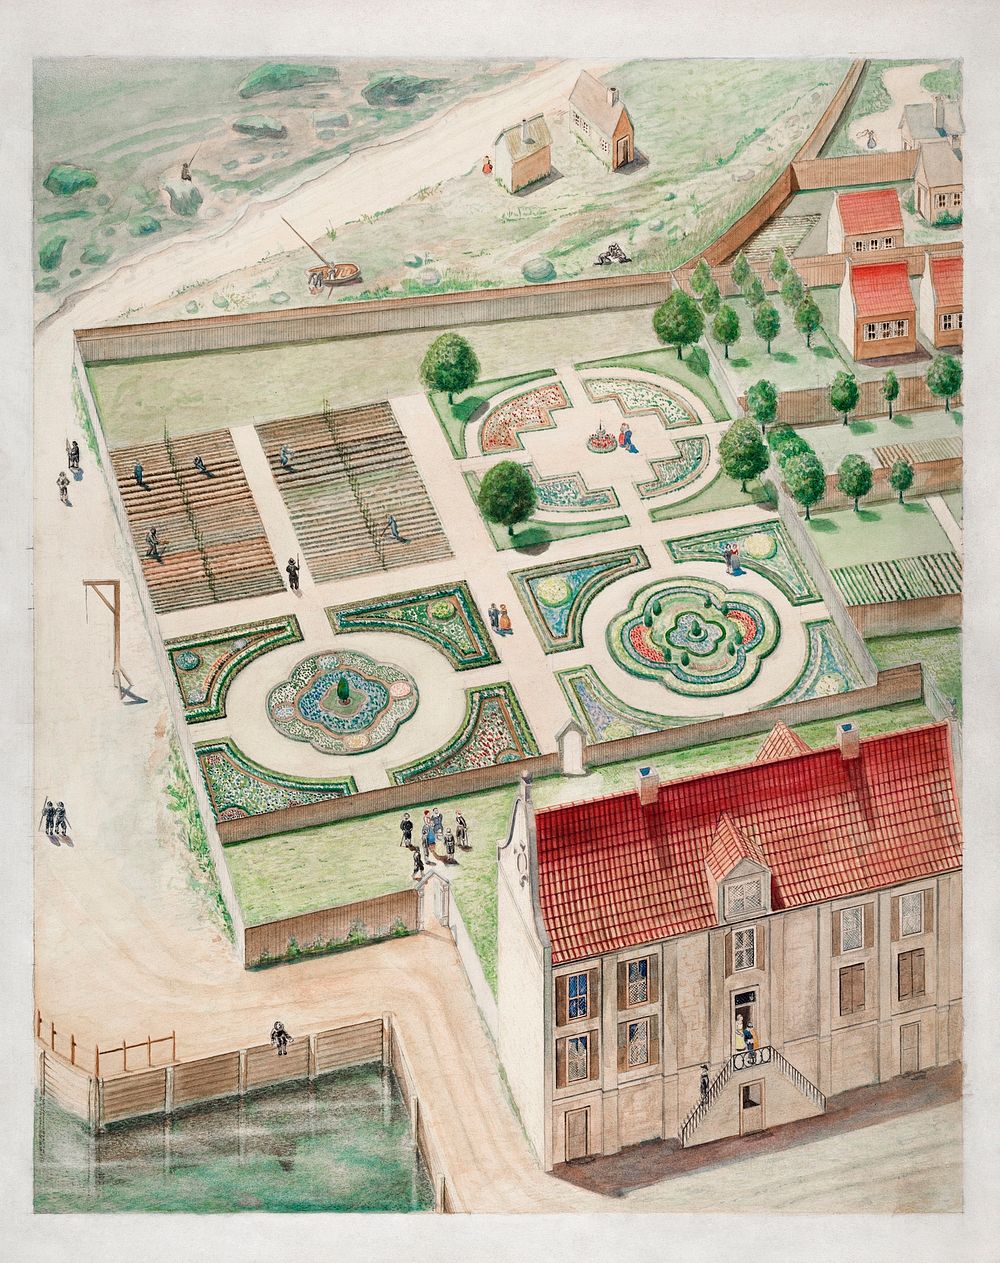 Whitehall Estate and Garden (1936) by Leo Drozdoff. Original from The National Gallery of Art. Digitally enhanced by…